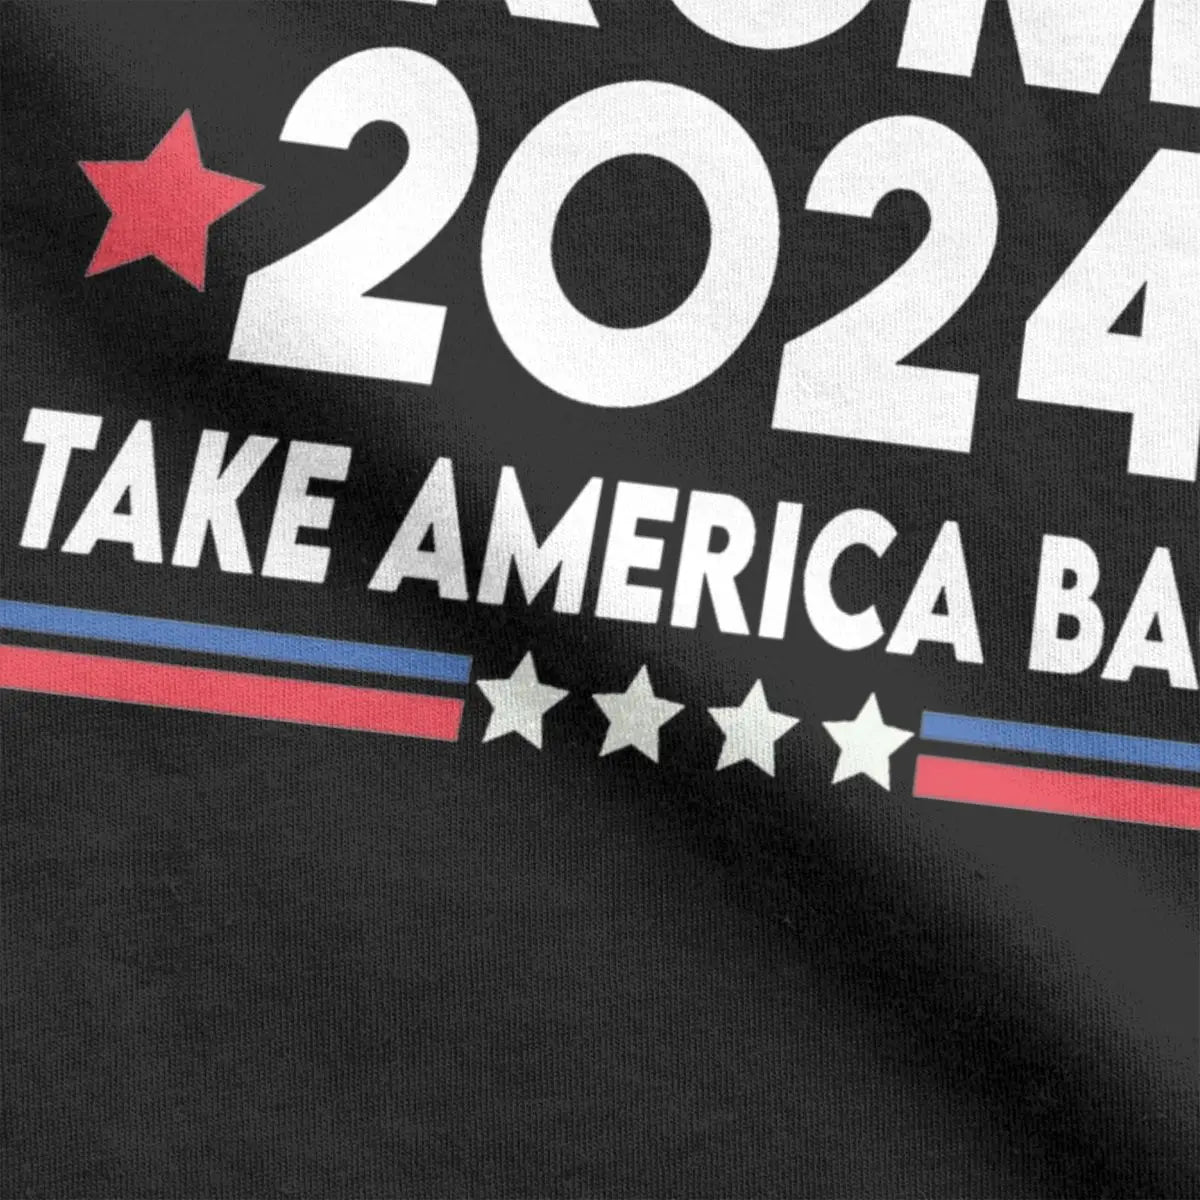 Trump 2024 Make Take America Back Men's T Shirts Funny Tees Short Sleeve Round Neck T-Shirt Pure Cotton Party Tops